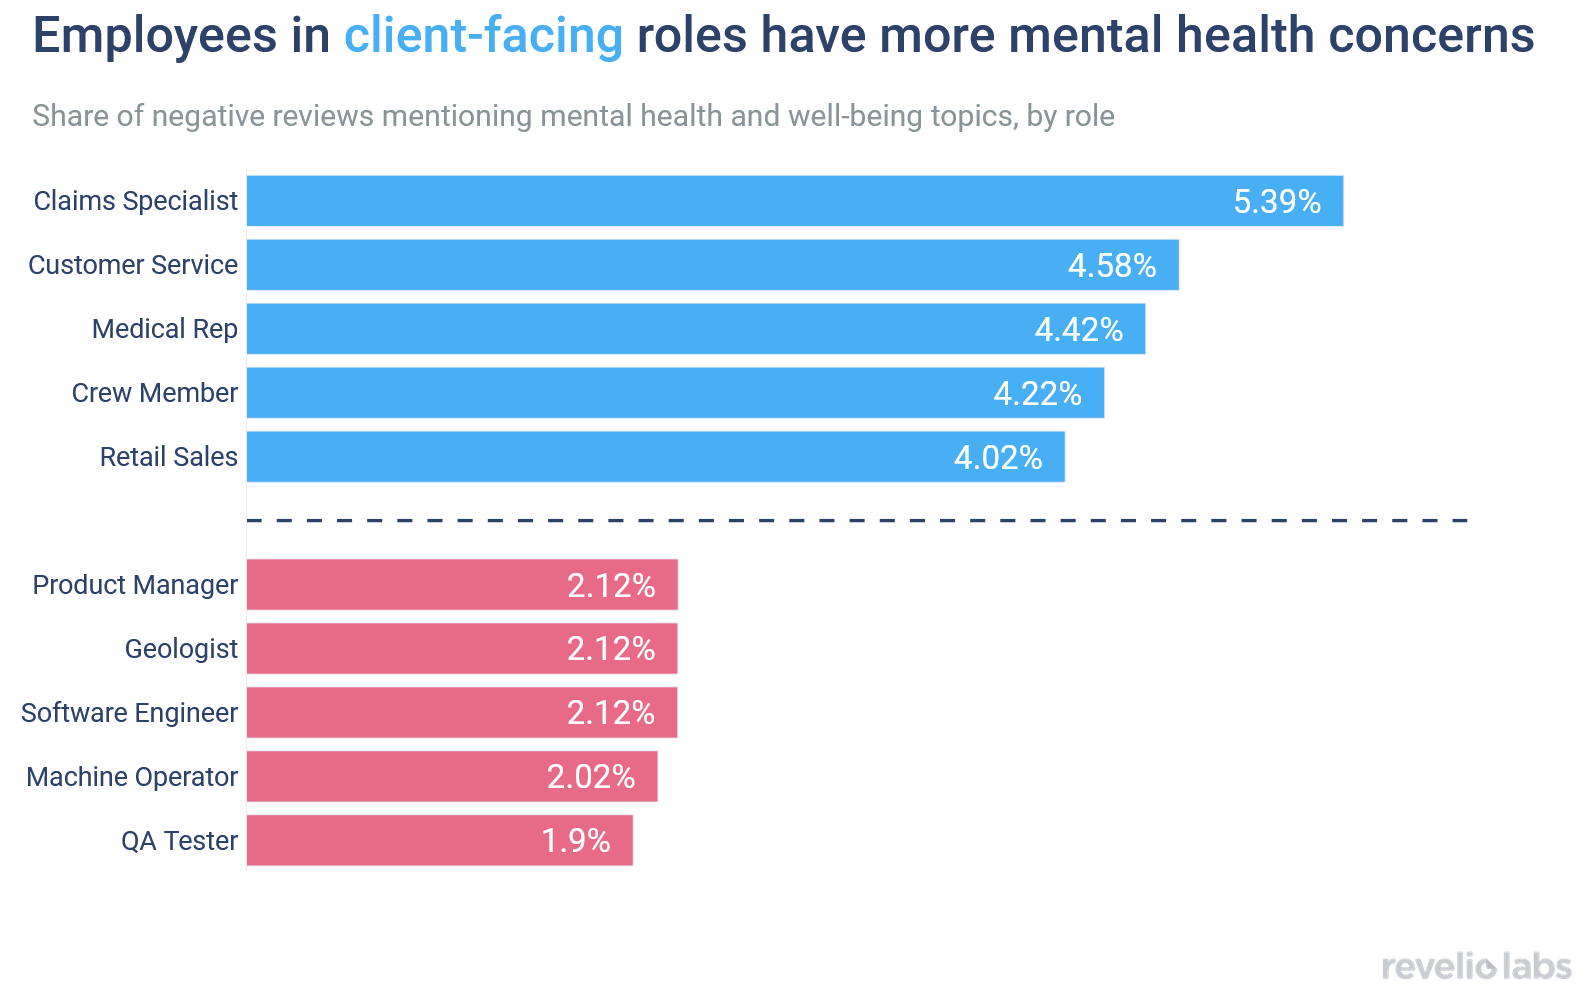 Employees in client-facing jobs have more mental health concerns